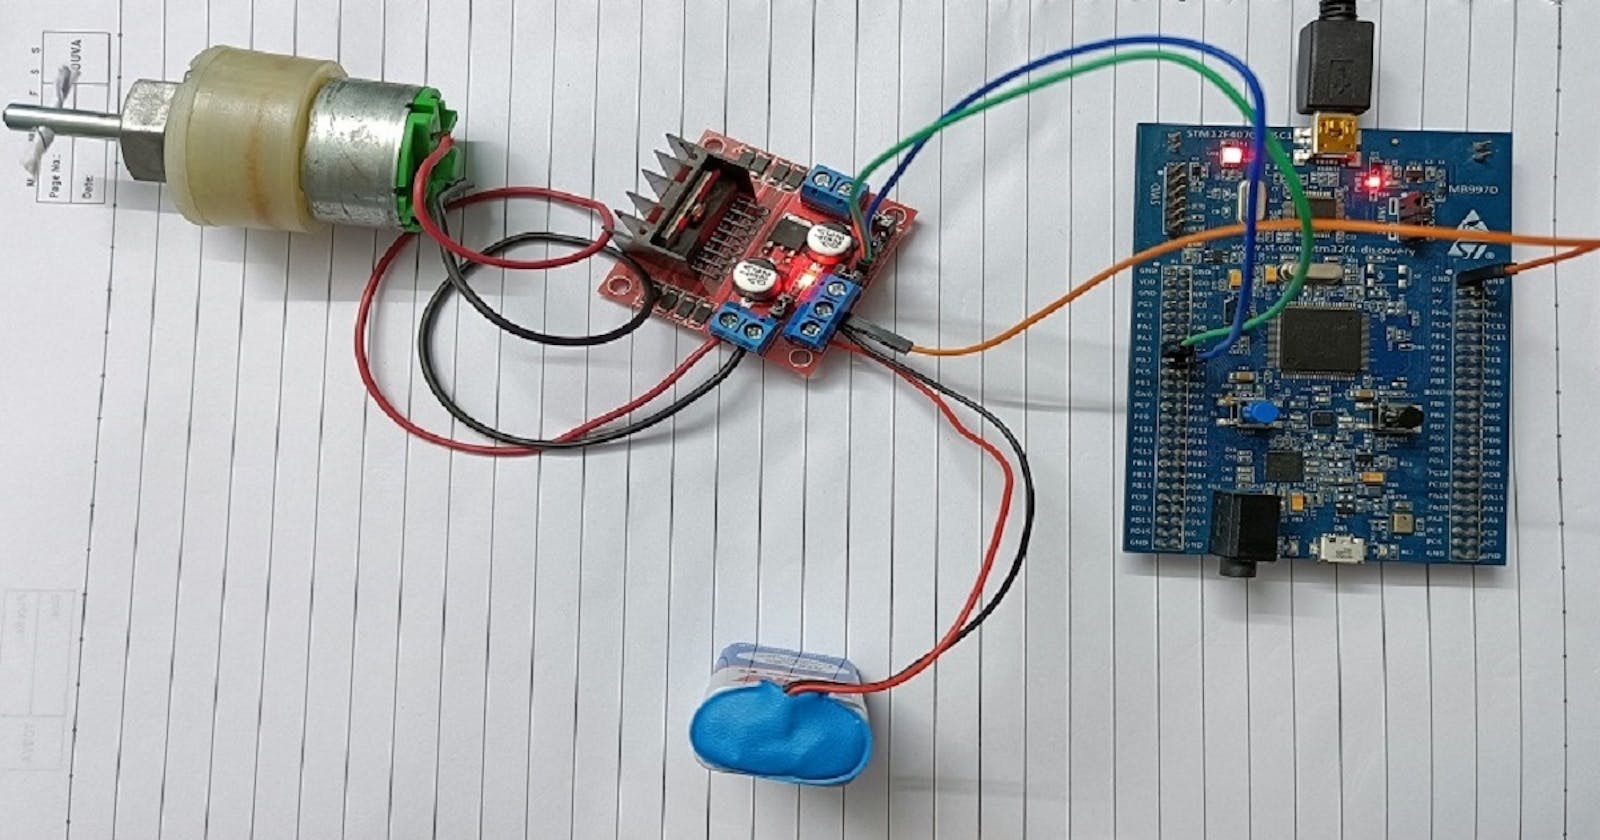 DC Motor Control using the L298N Motor Driver Interfaced with the STM32F407 Discovery Kit